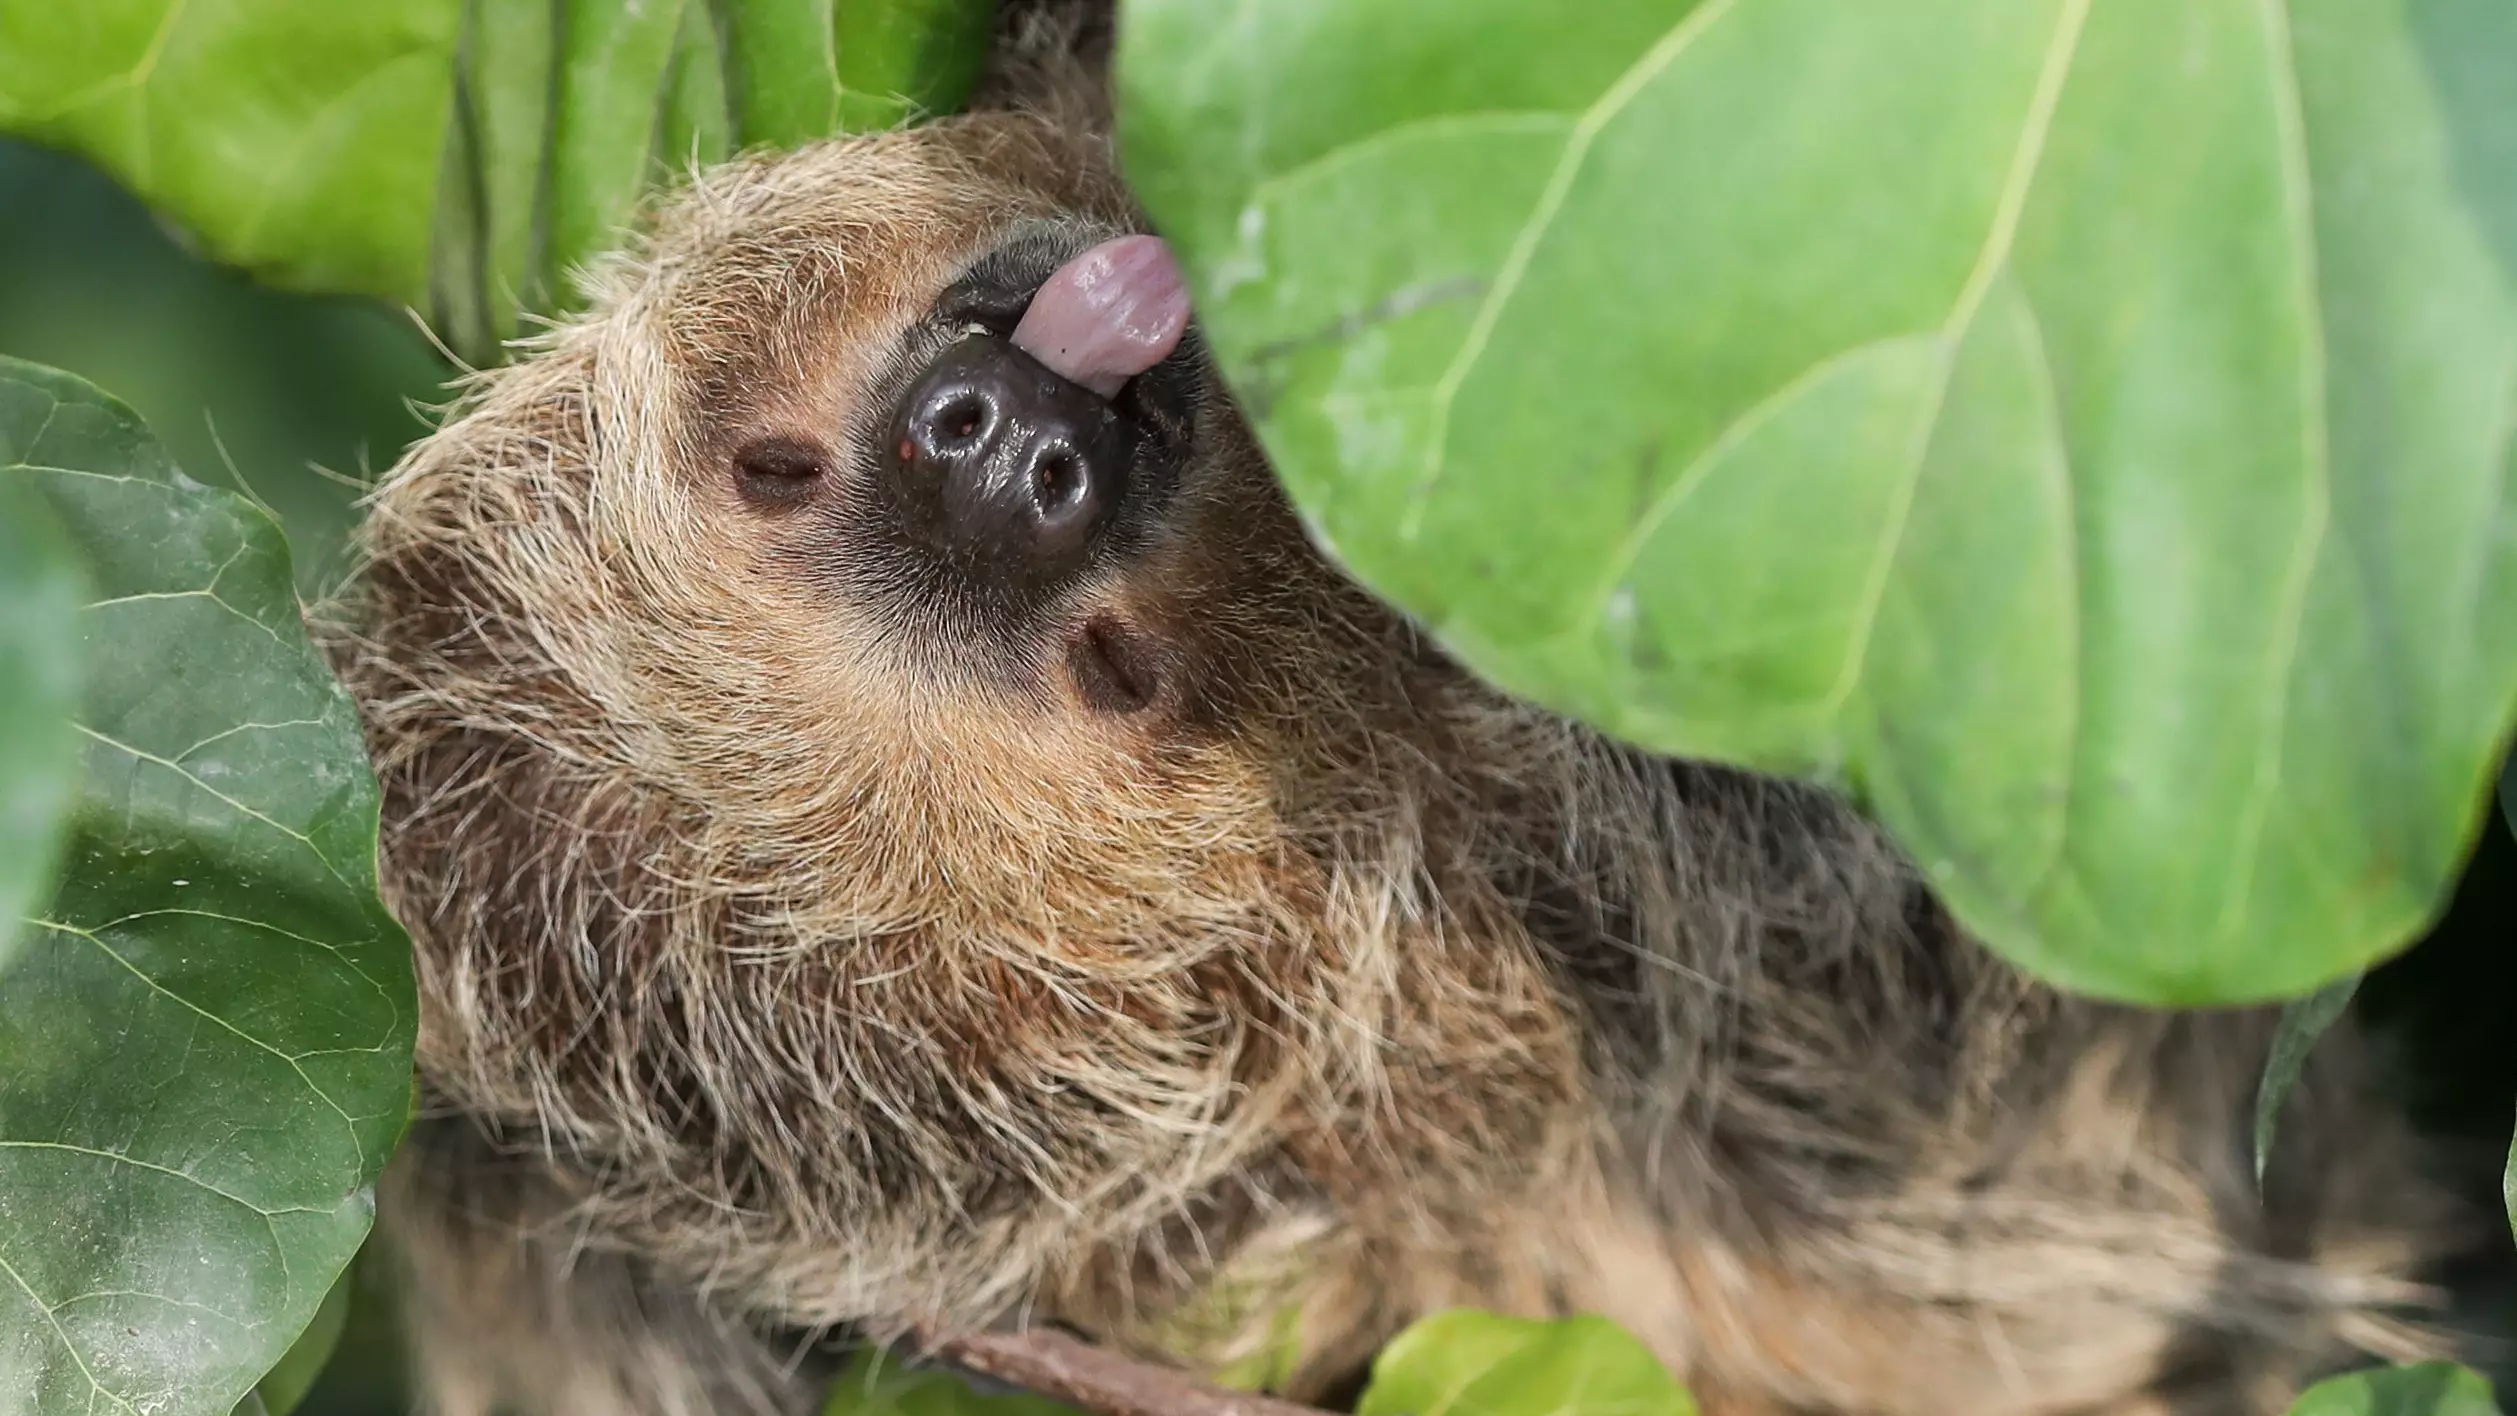 A Zoo In Wales Now Has A Retirement Home For Sloths